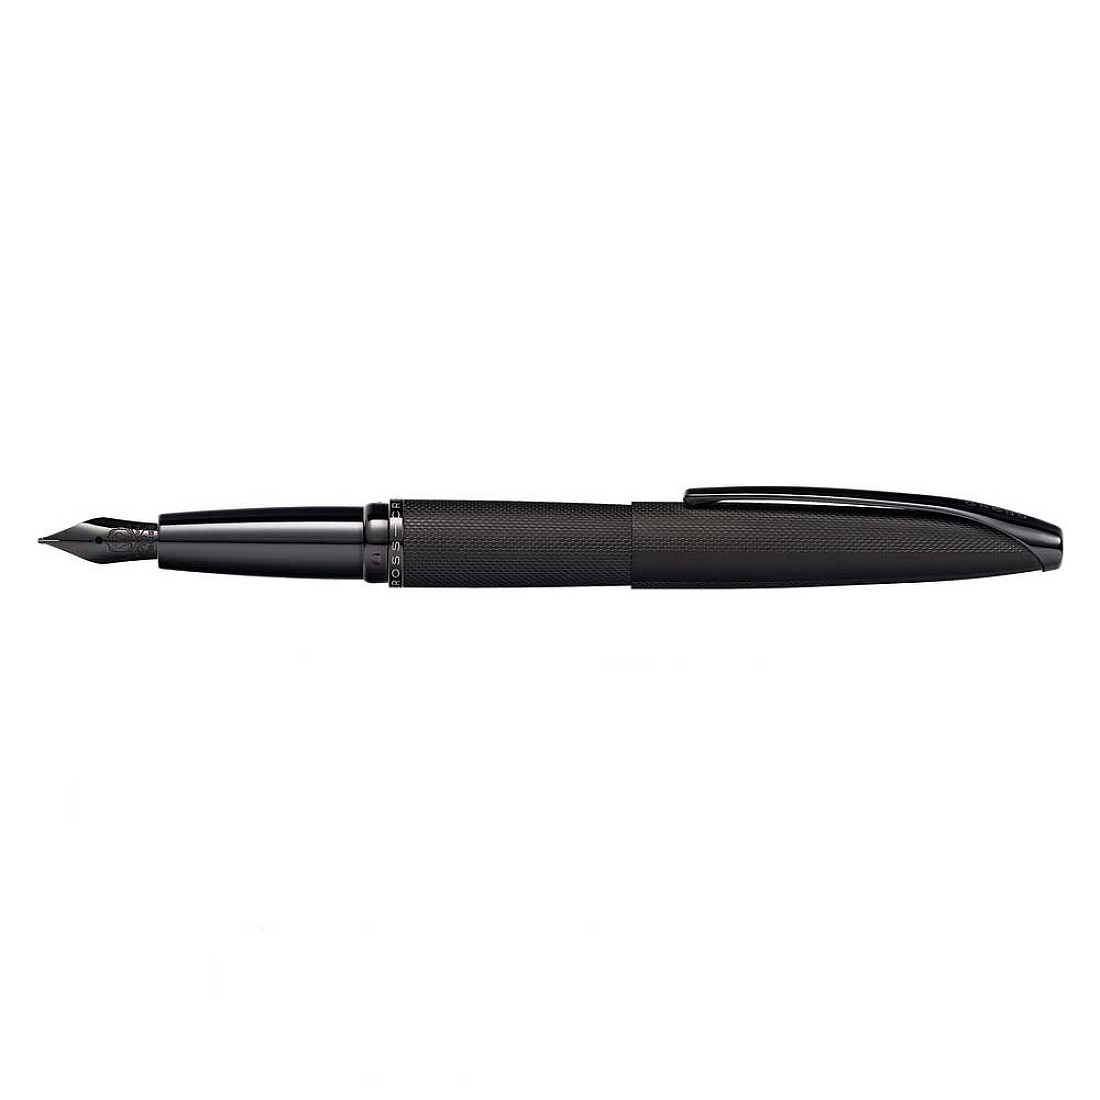 Cross ATX Brushed Black PVD Fountain Pen with Etched Diamond Pattern and Stainless Steel Medium Nib plated with Polished Black PVD 